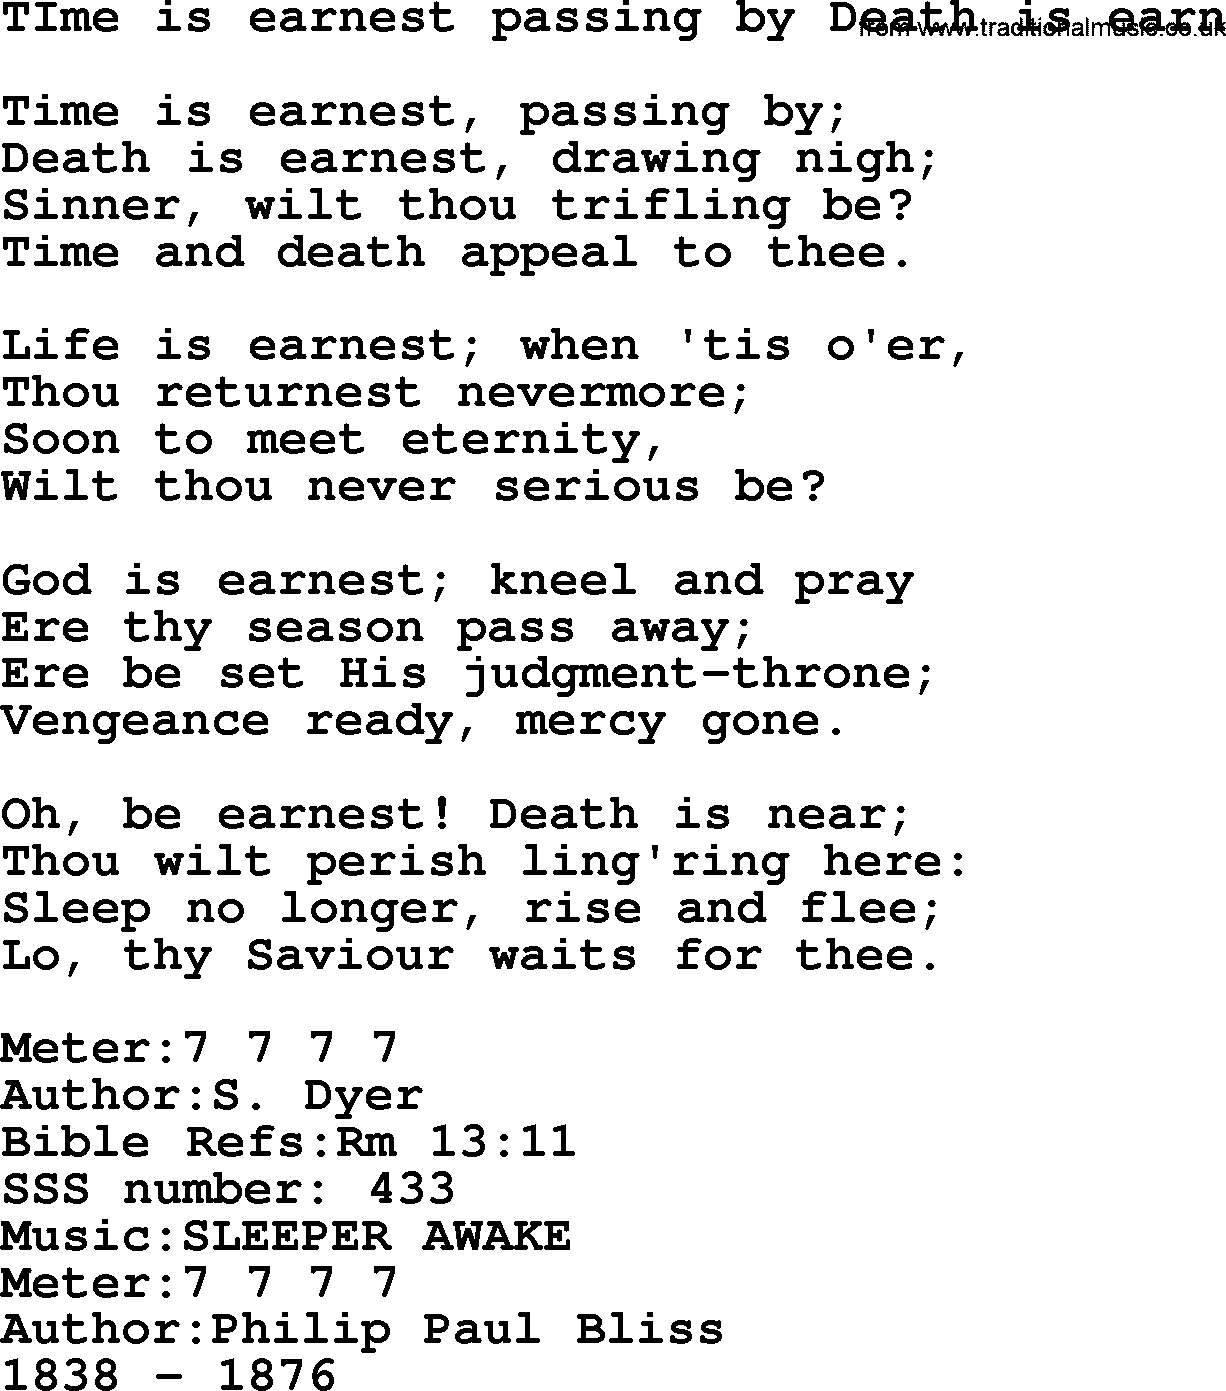 Sacred Songs and Solos complete, 1200 Hymns, title: TIme Is Earnest Passing By Death Is Earn, lyrics and PDF